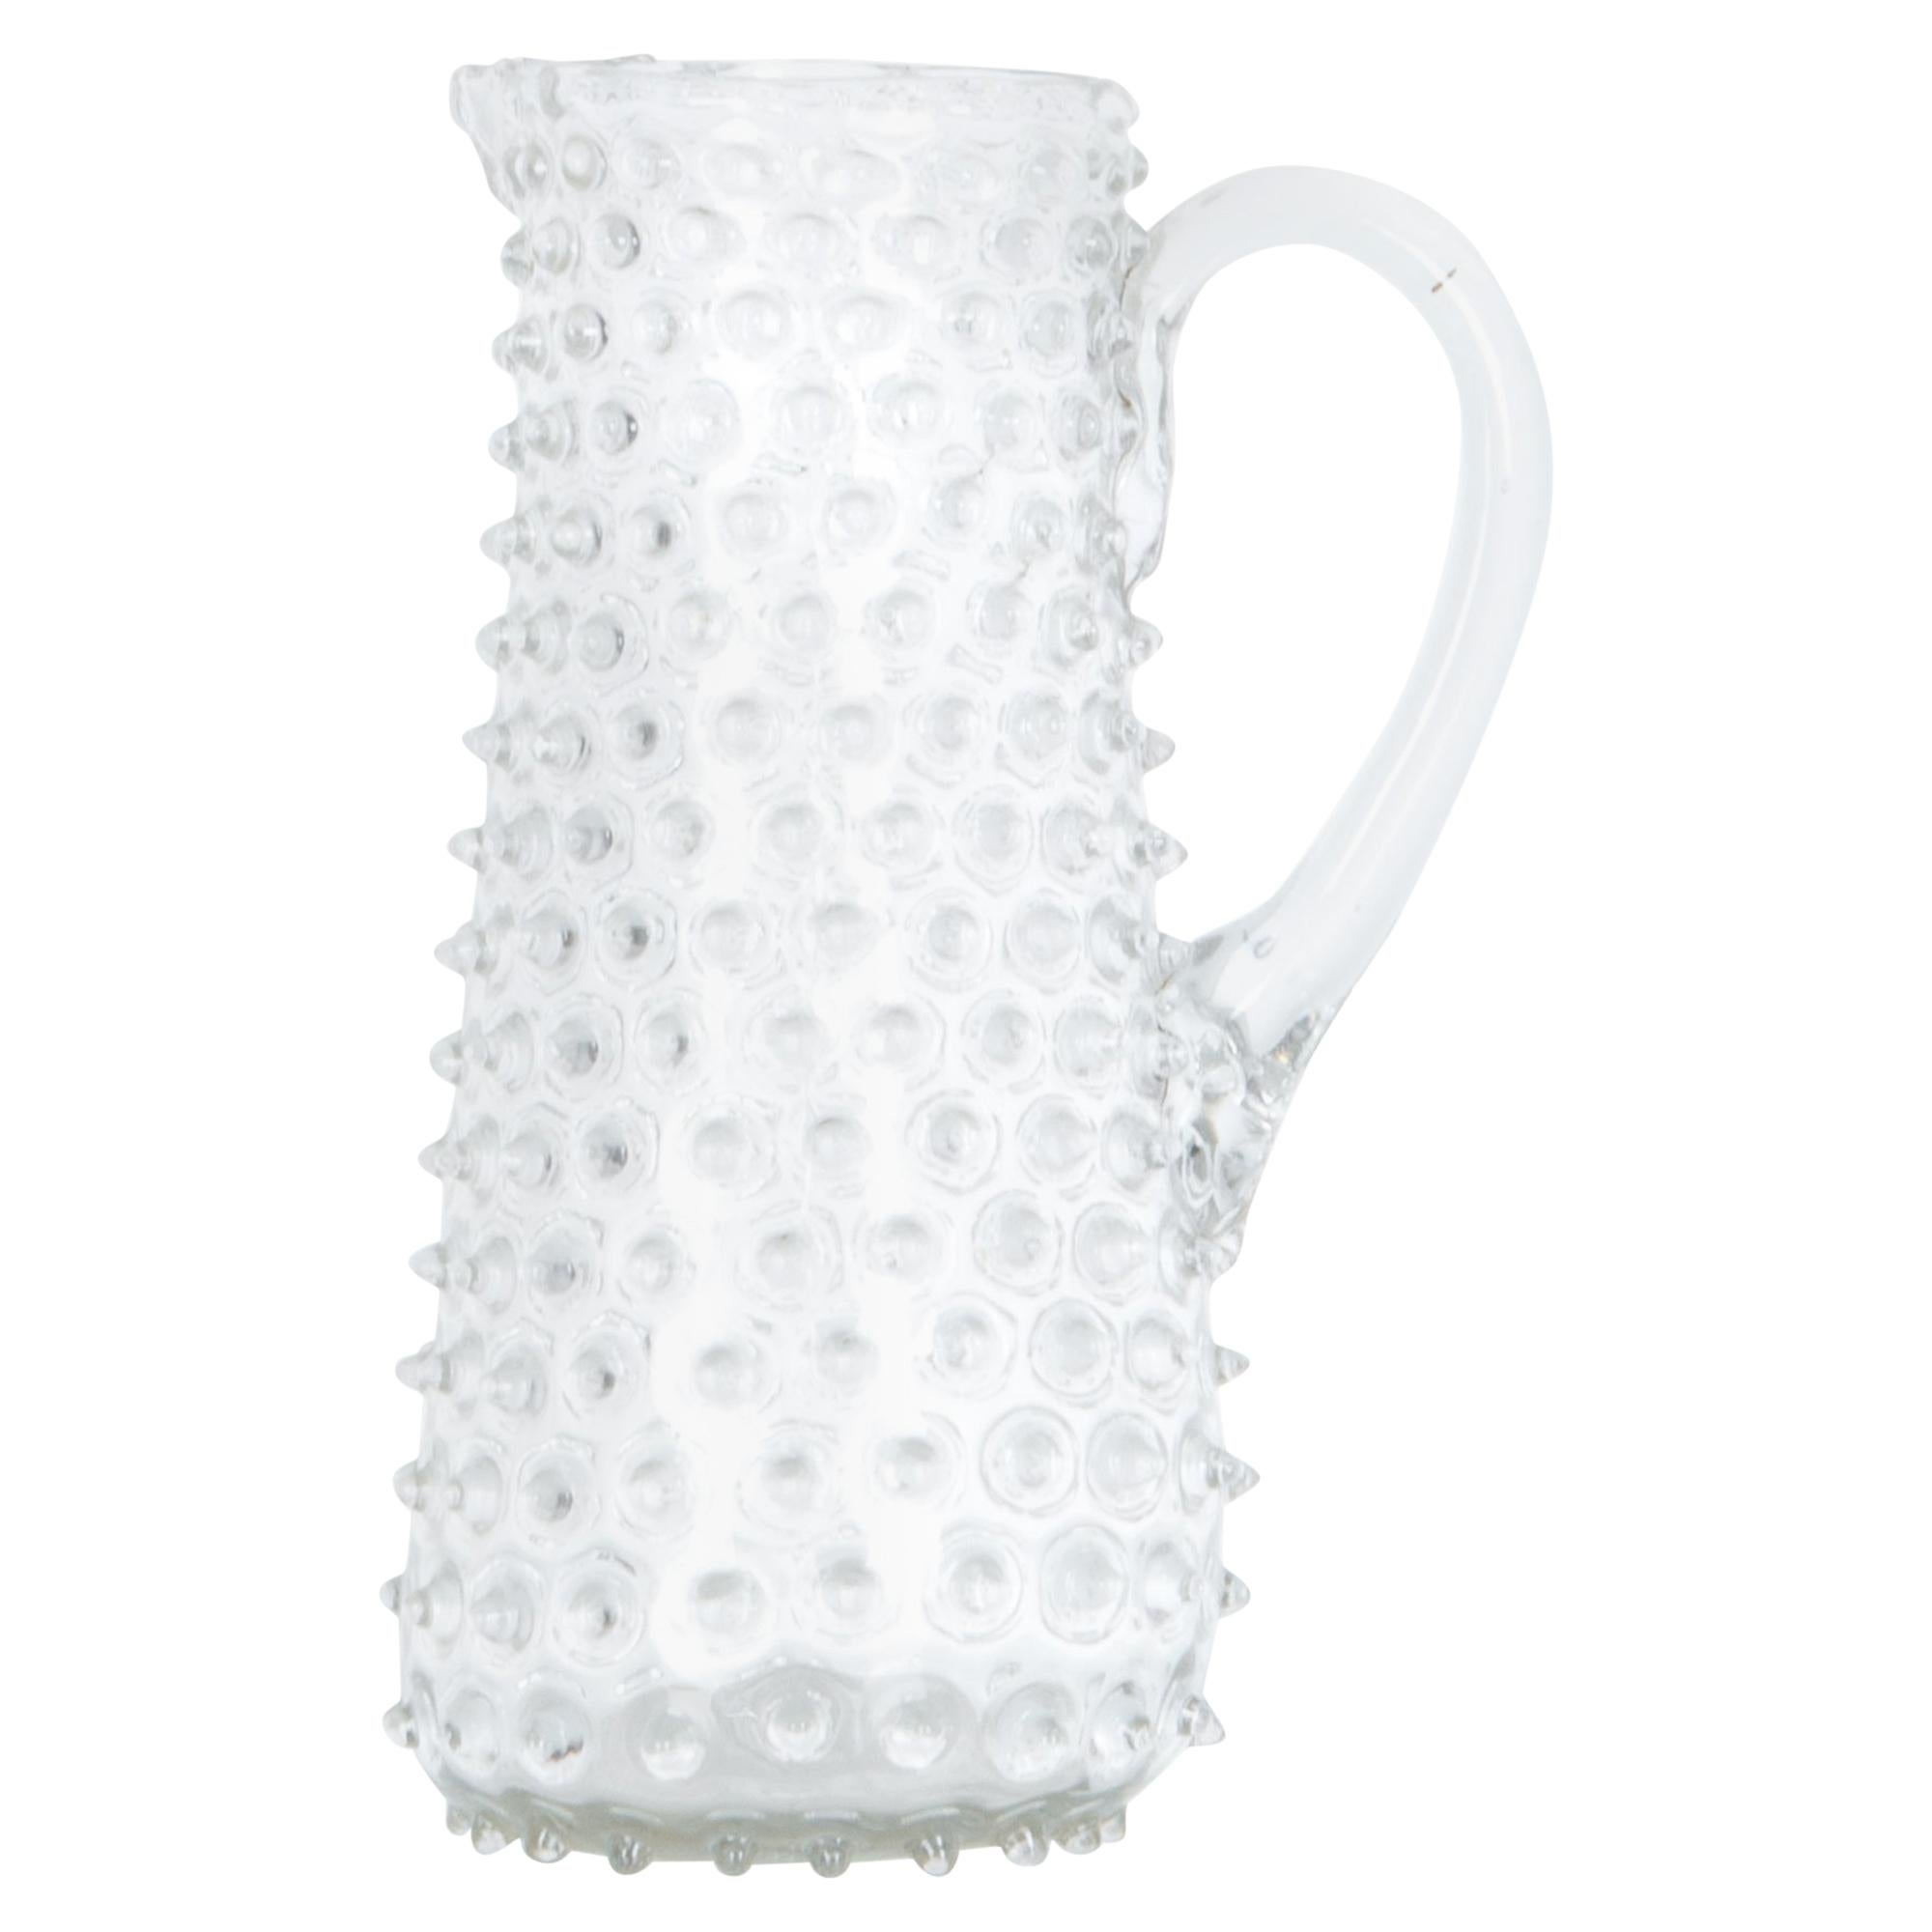 Early 19th Century Liege Glass Pitcher